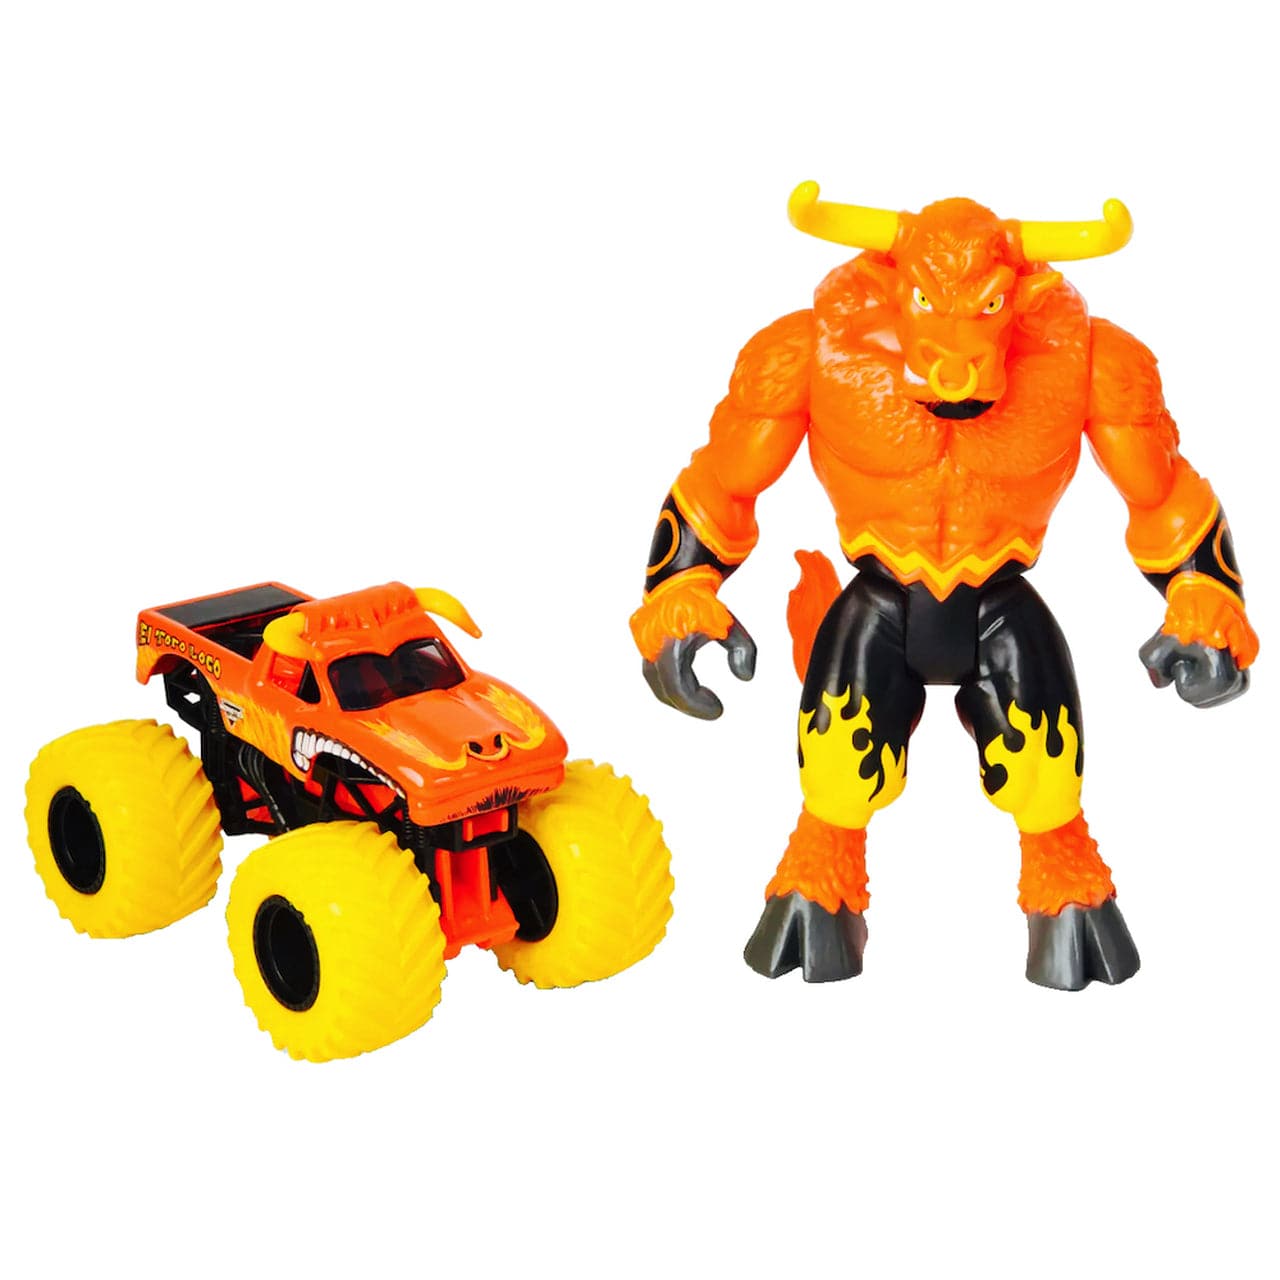 Spin Master-Monster Jam 1:64 Scale Monster Truck and Creature-20129654-EL Toro Loco and Furioso-Legacy Toys